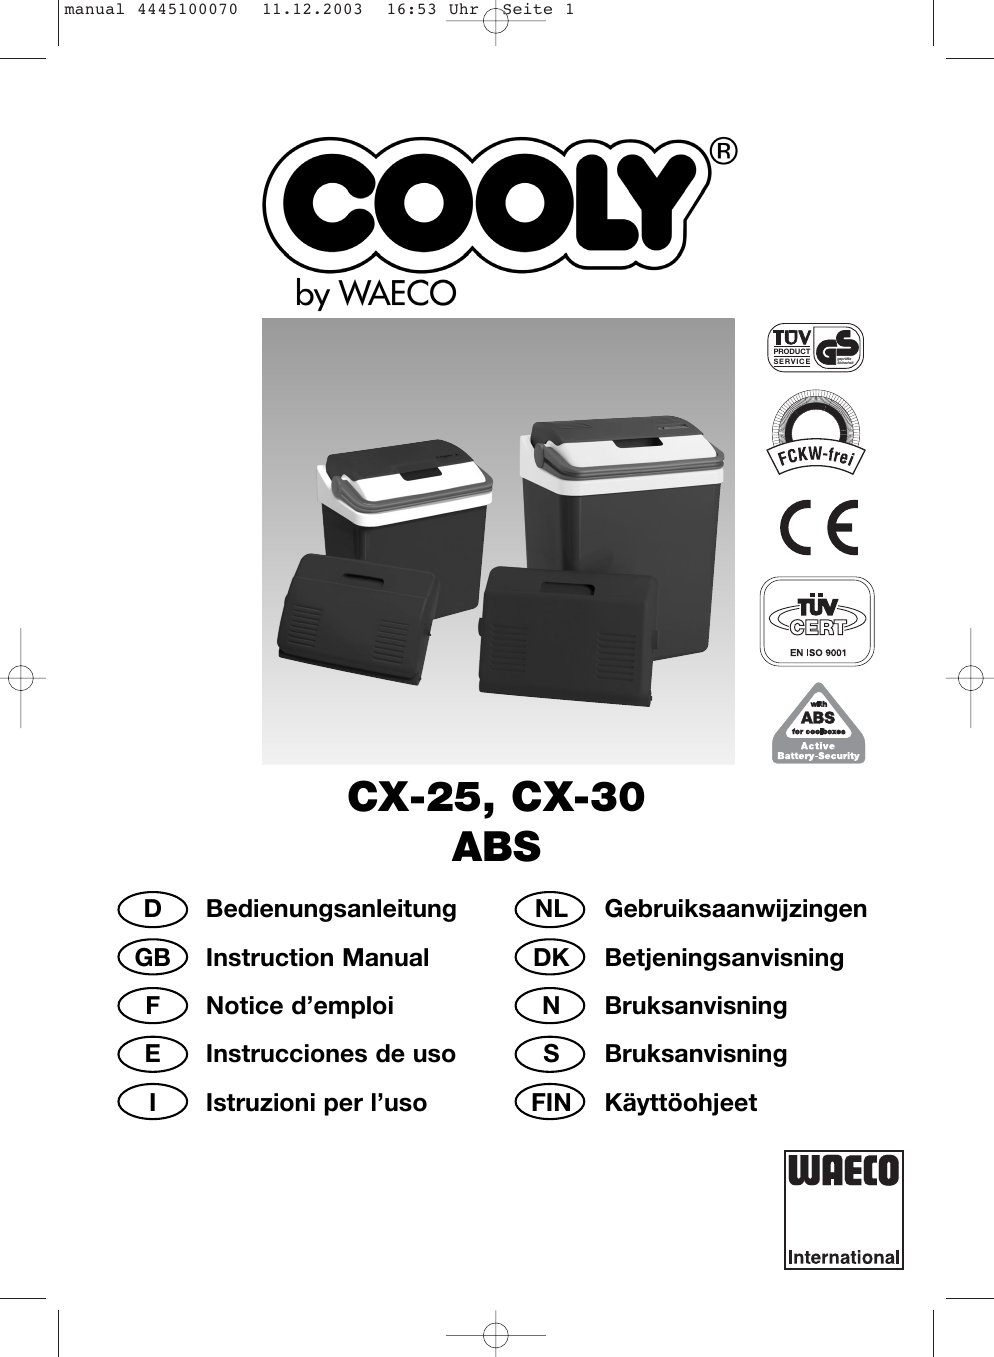 Waeco Cooly CT25ABS